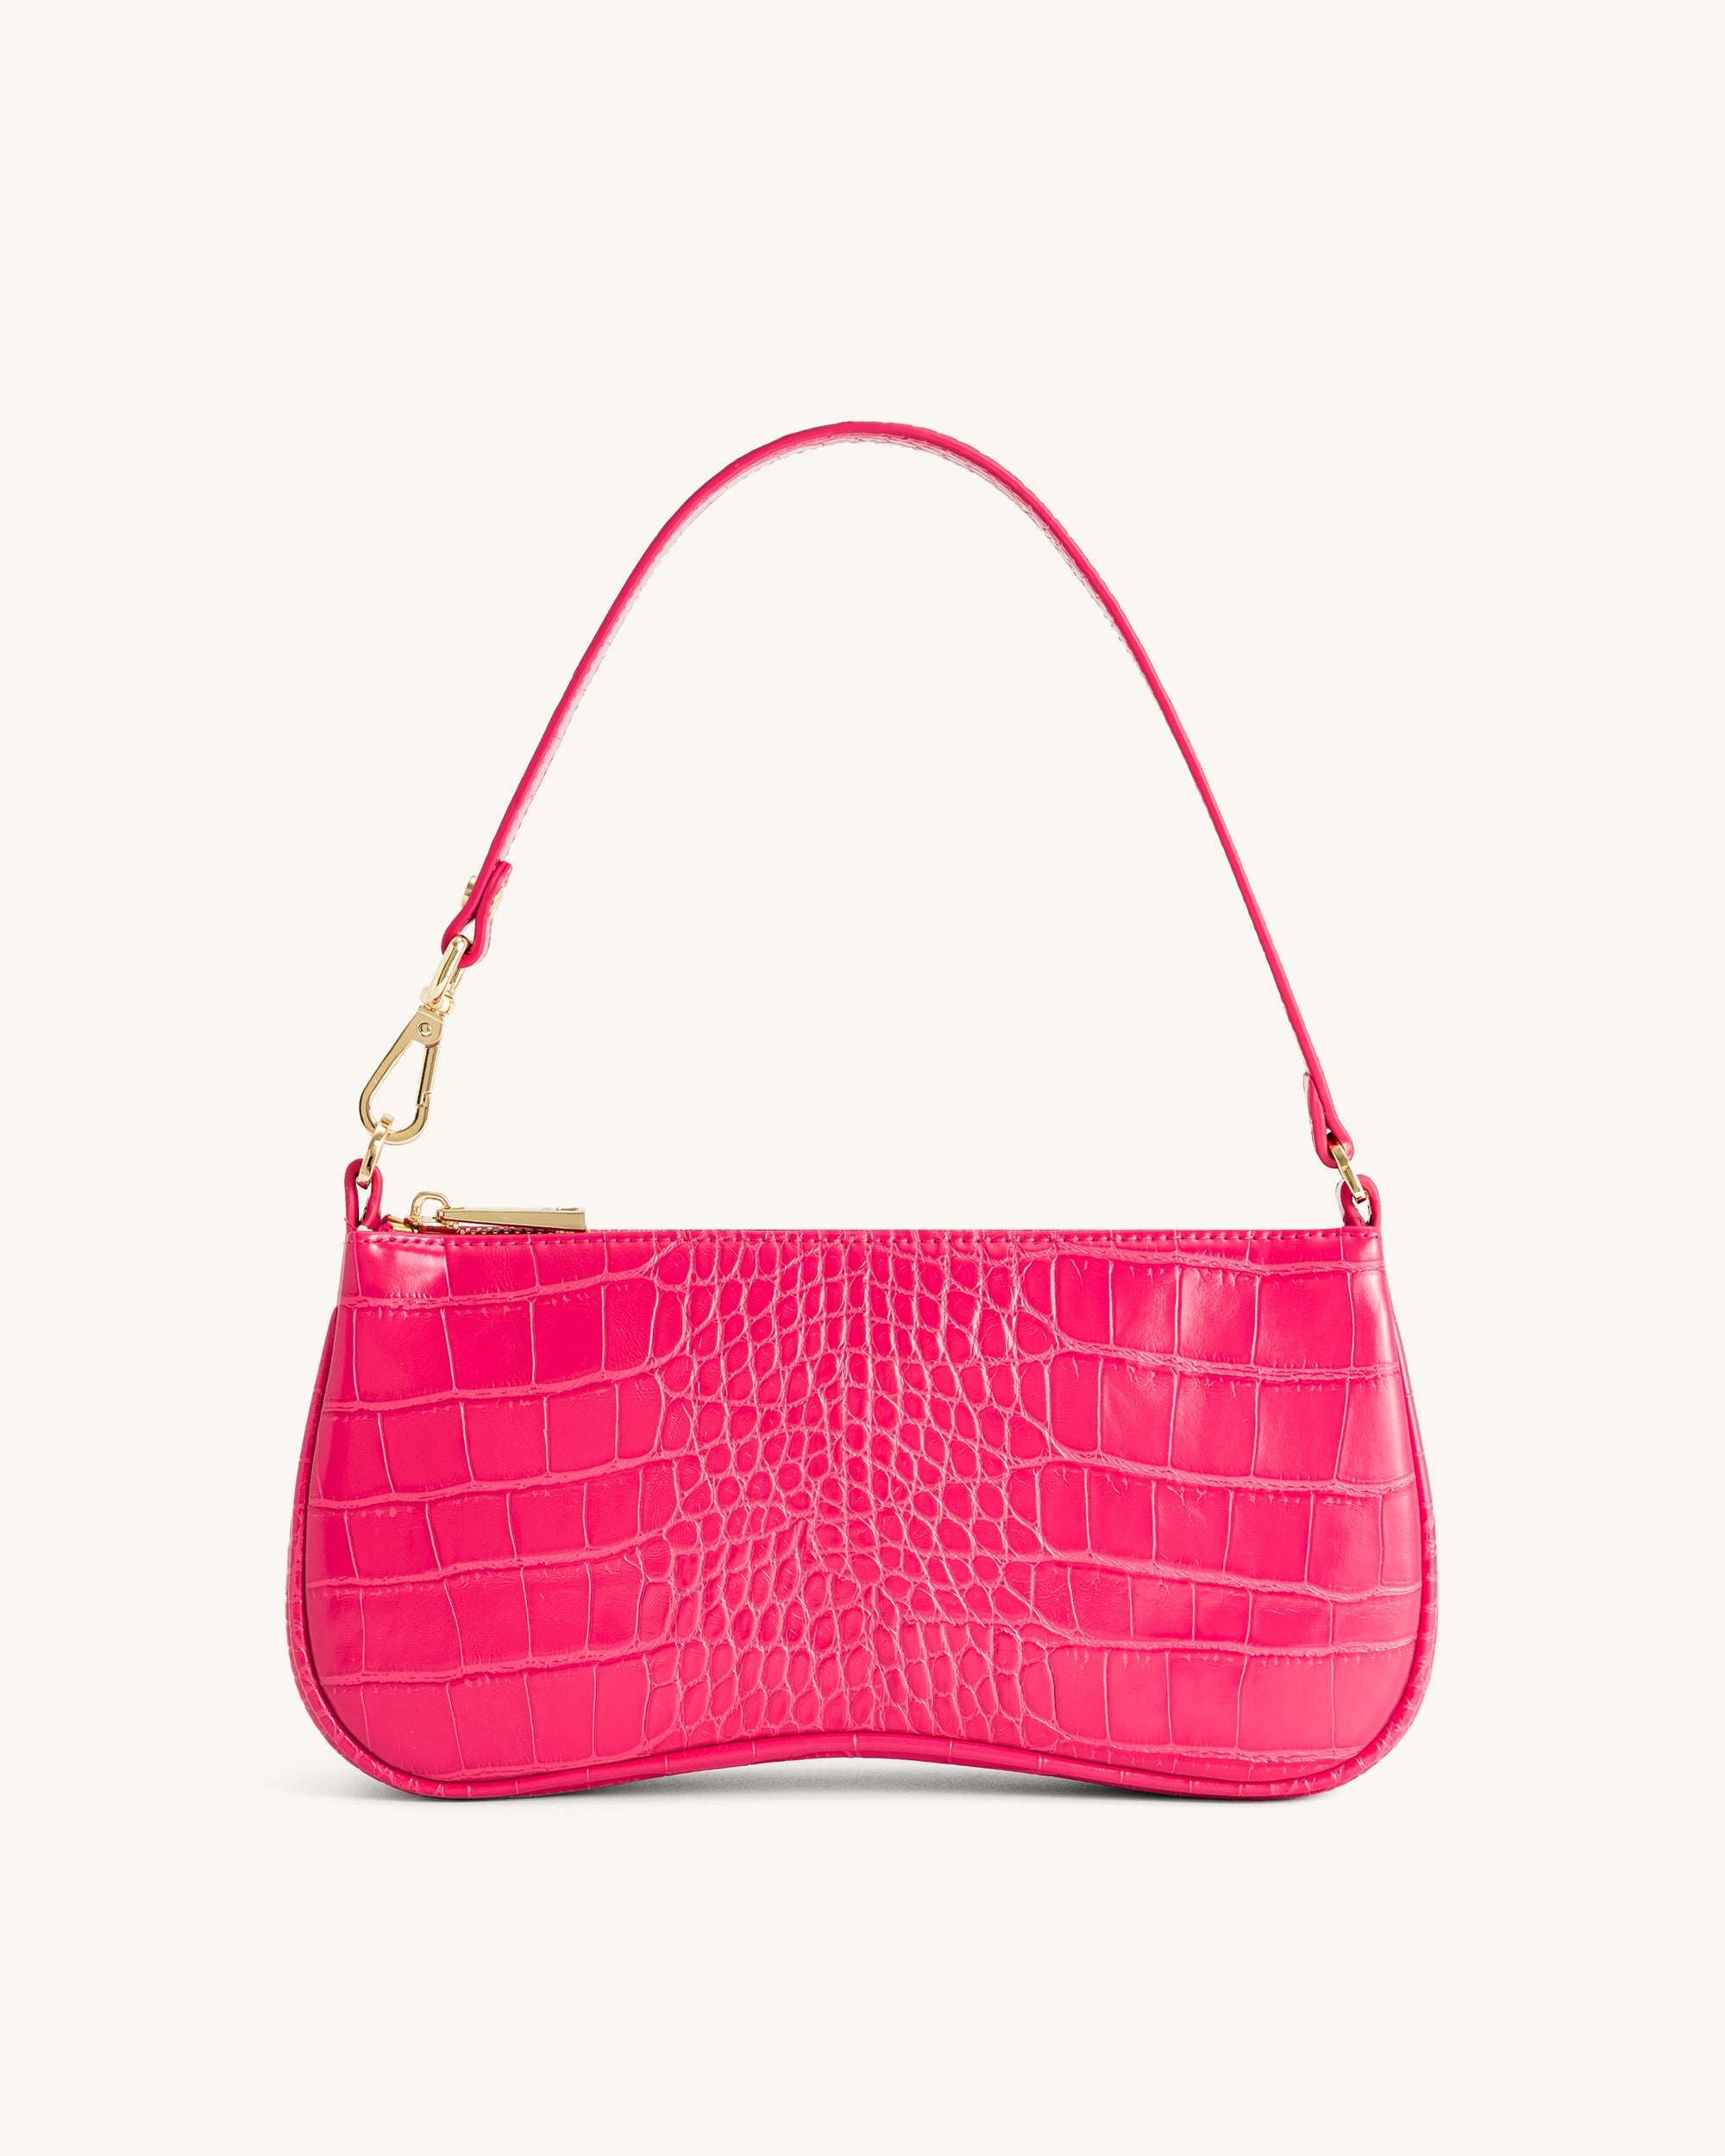 SHEIN Bags Sale Extra 15% Off